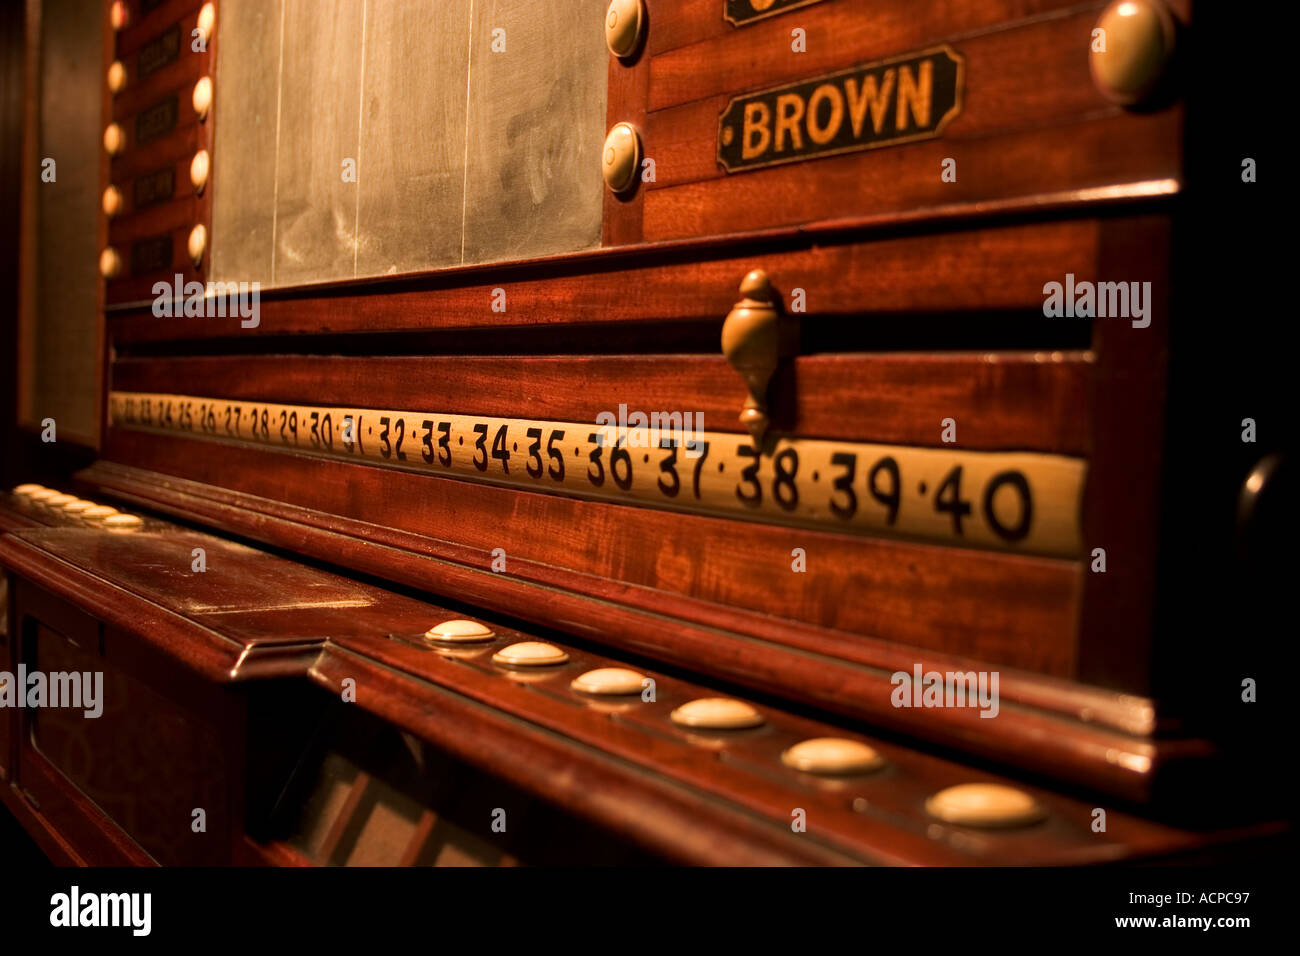 A view of a traditional snooker scoreboard Stock Photo